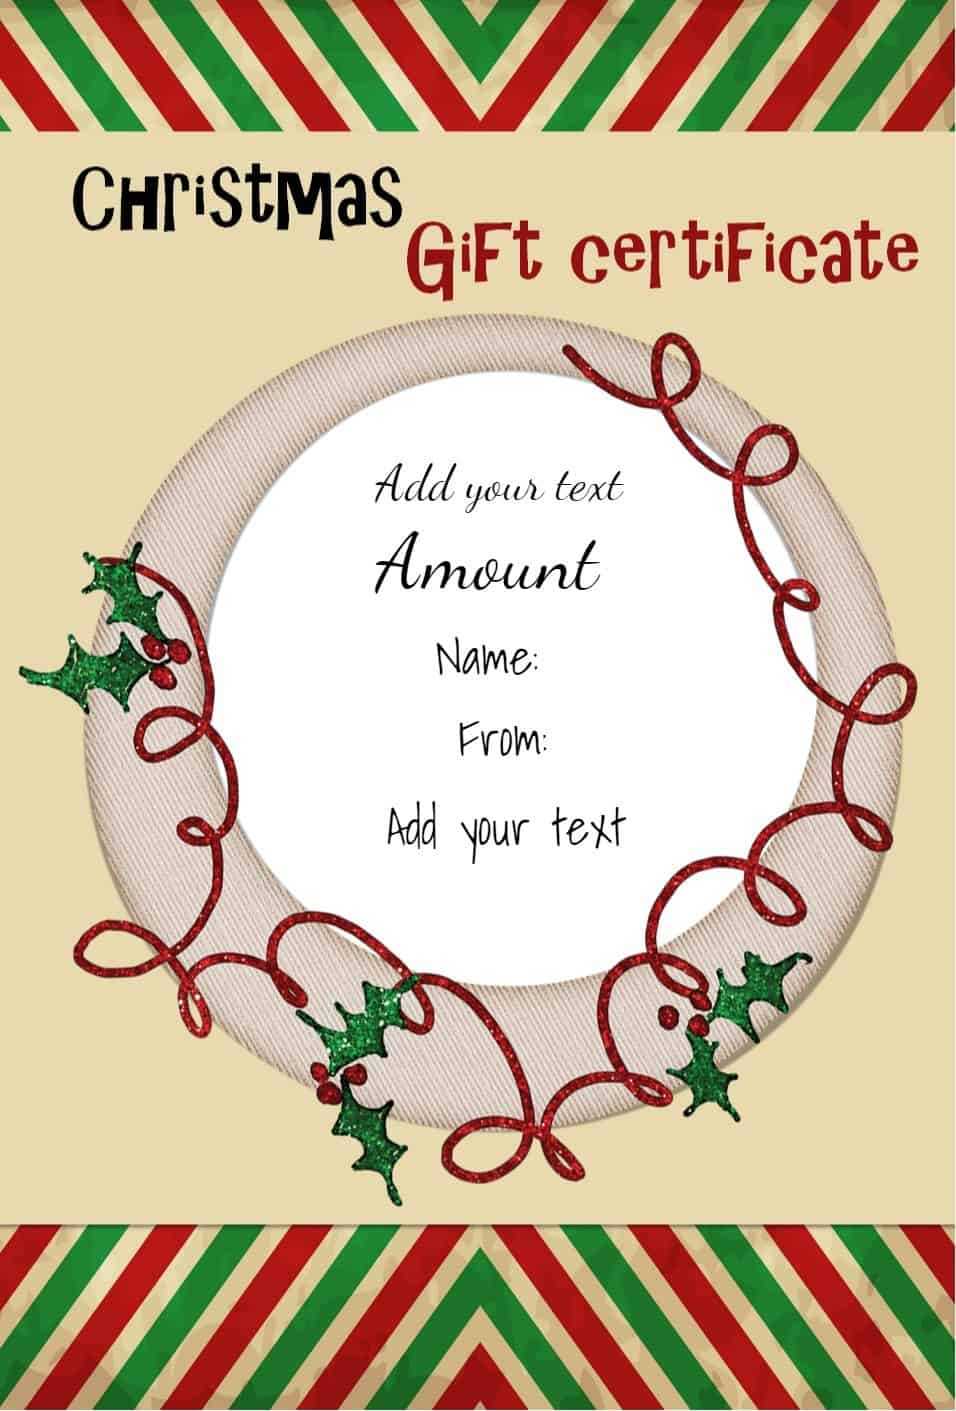 Free Christmas Gift Certificate Template | Customize Online Intended For Homemade Christmas Gift Certificates Templates